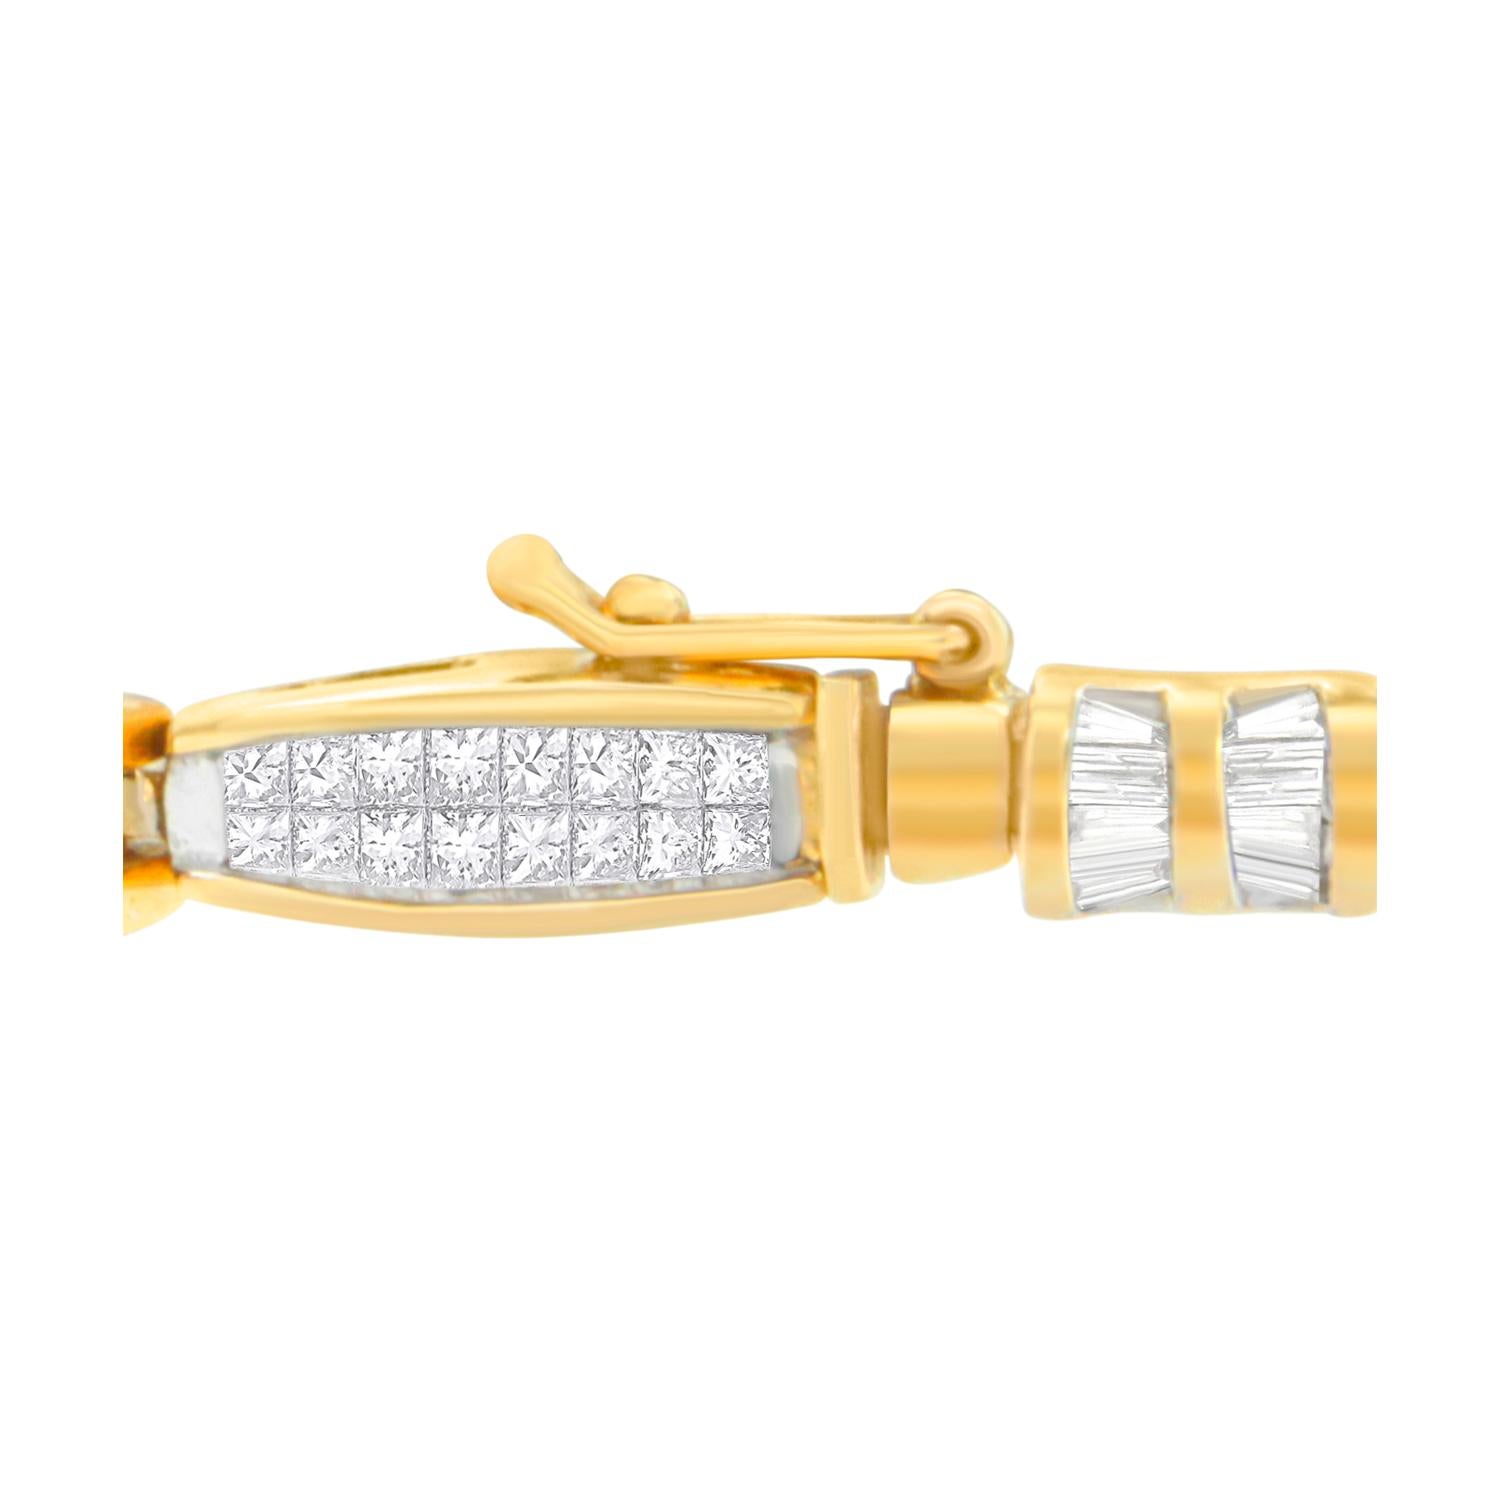 A mix of classic princess and baguette cut diamonds beautifully weave their way through this beaded style bracelet. Finished in polished yellow gold, and featuring two carats of sparkling stones, it's a wonderful way to surprise that special woman